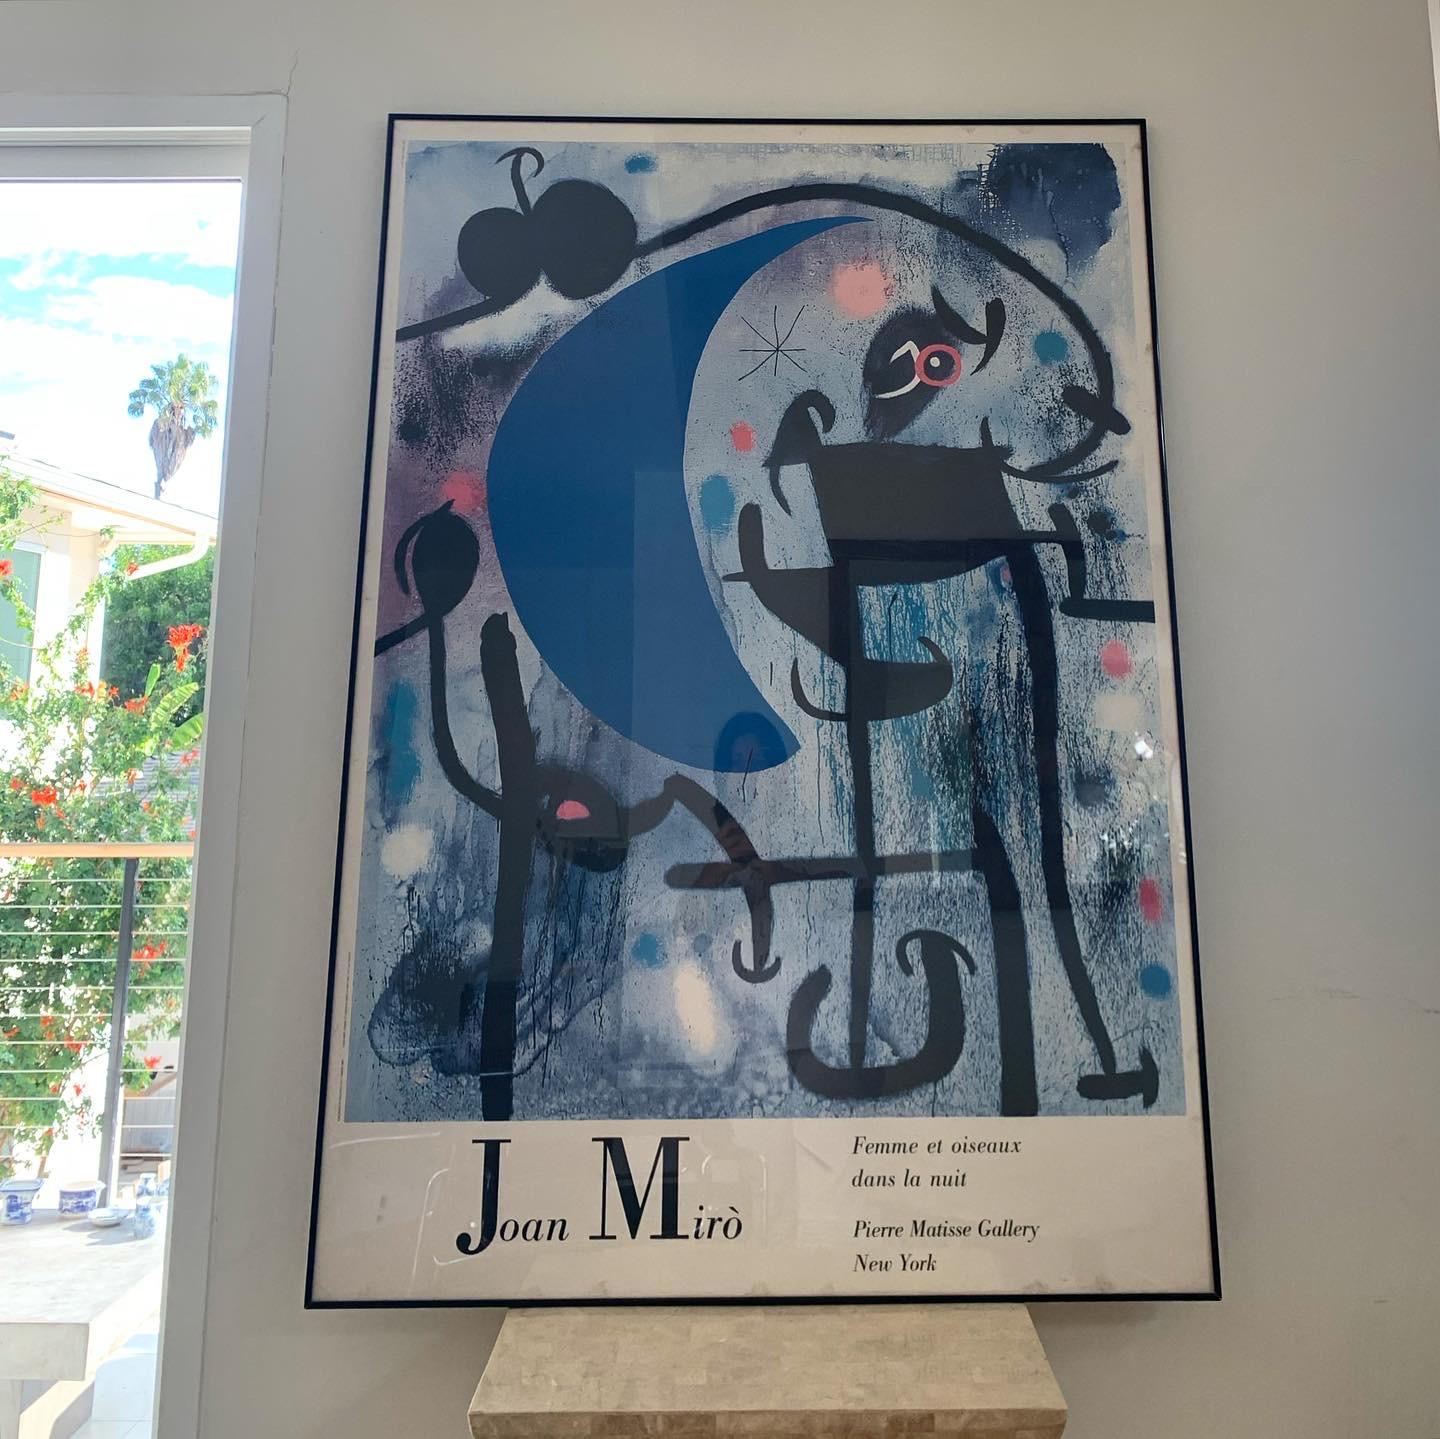 Monumentally sized framed (under acrylic) vintage poster of Miró’s « Femme et Oiseaux dans la Nuit » from Pierre Matisse Gallery, New York 1987. Over 3ft x 4ft. Some faint discoloration along poster edges, but overall fabulous condition.

Measures: